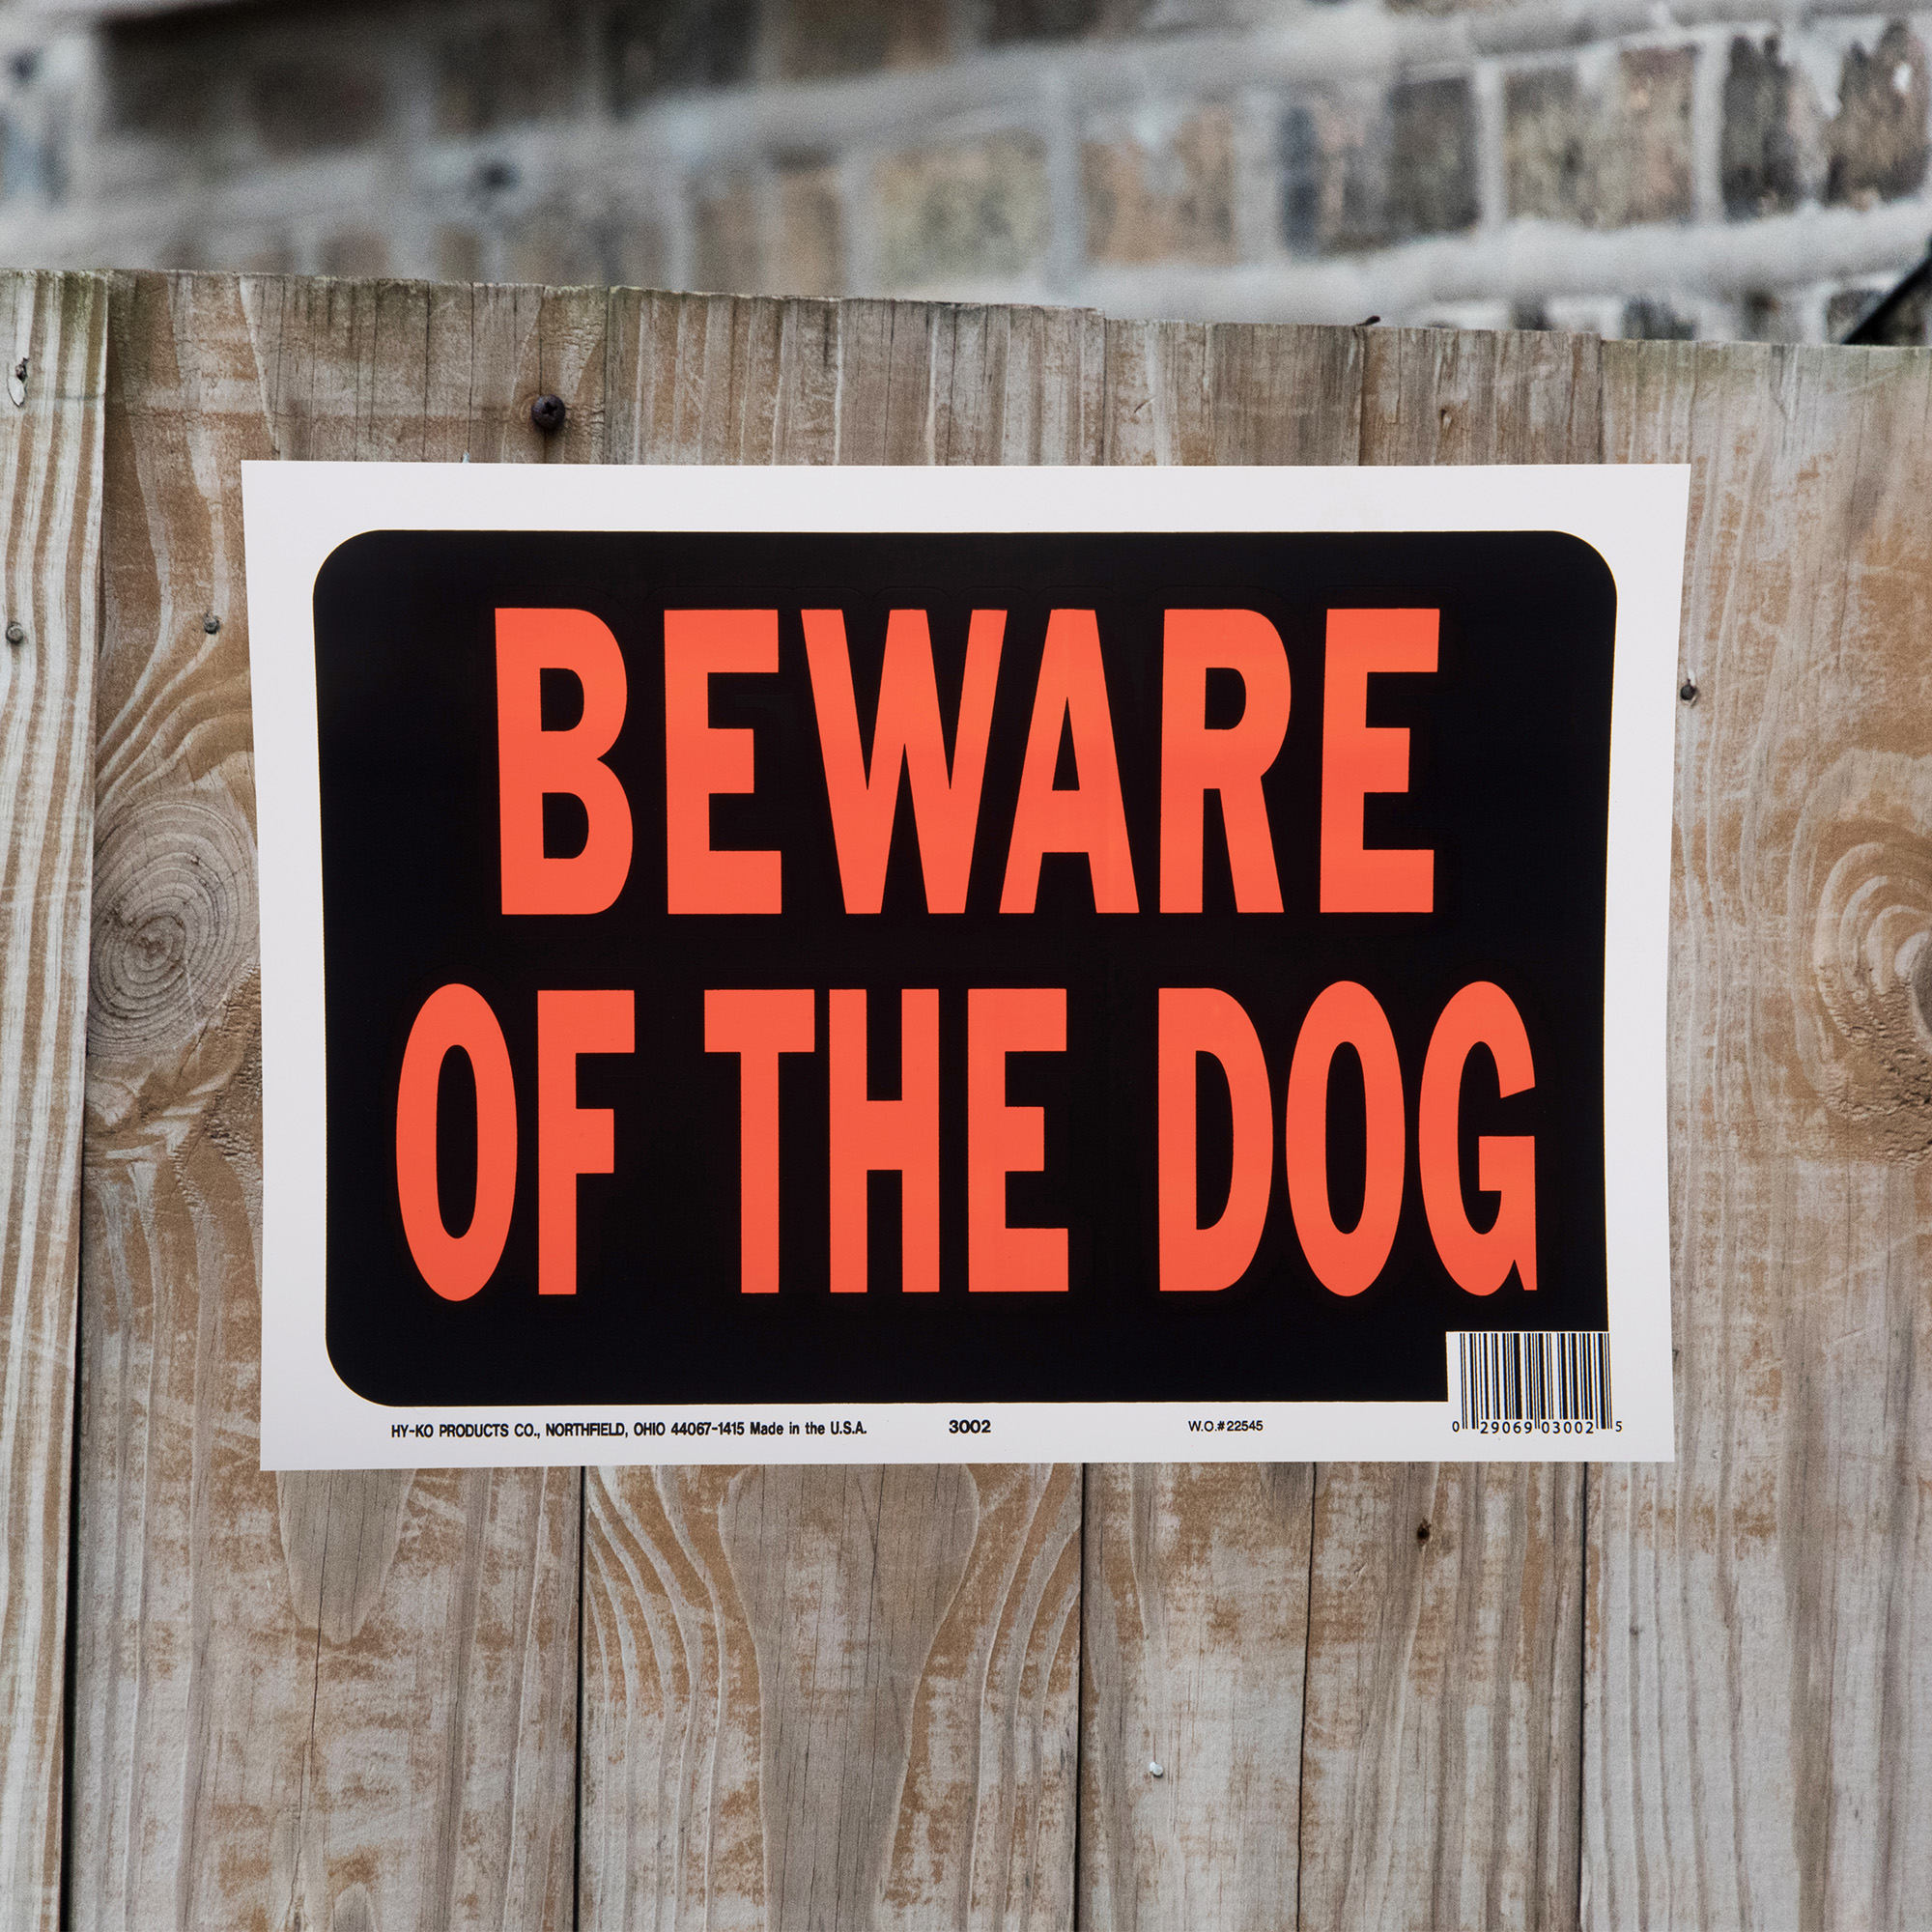 Hy-Ko 8.5 x 12 inch Plastic Beware of the Dog Sign - image 5 of 10